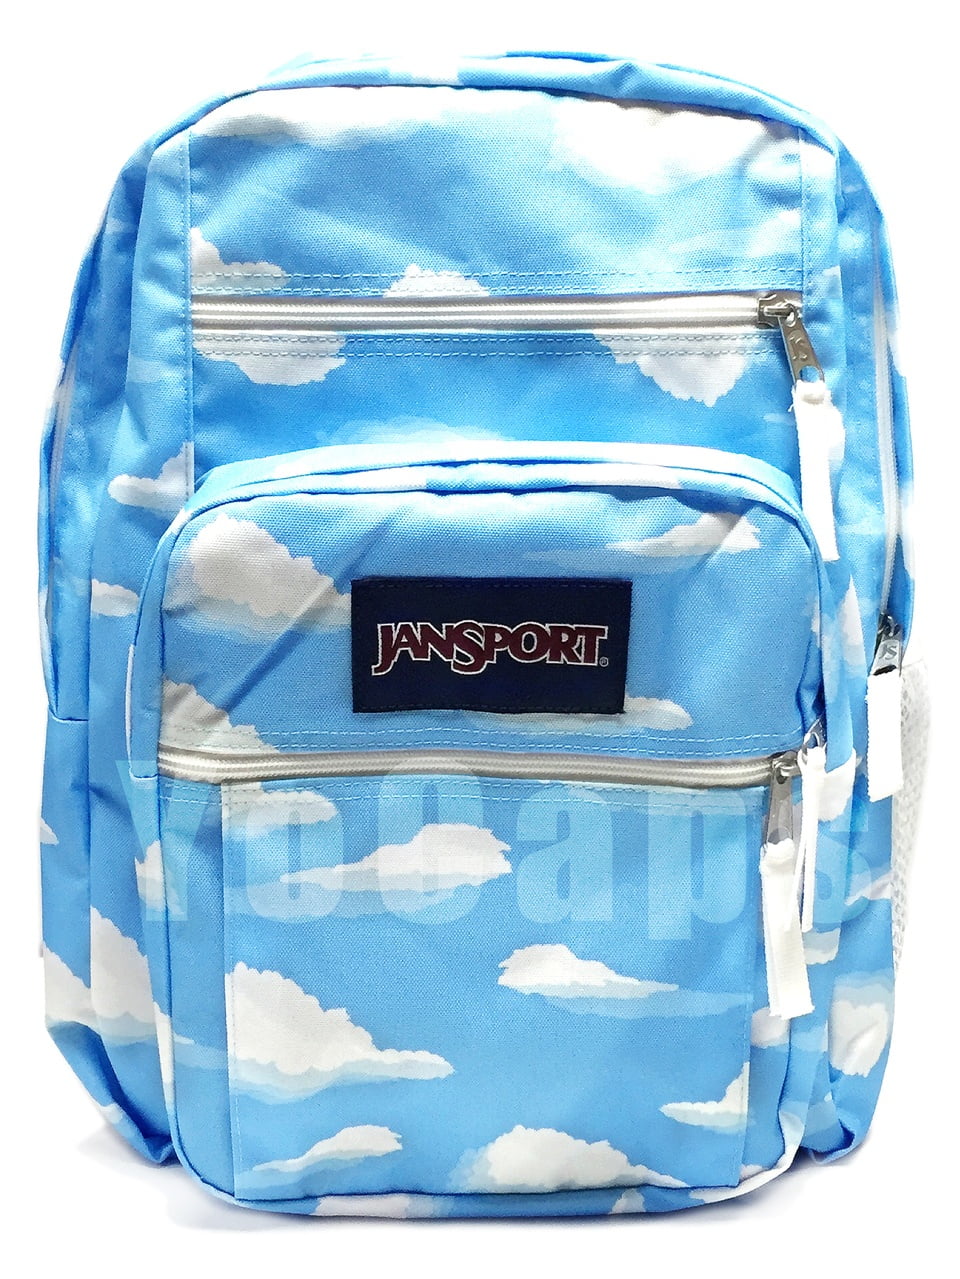 Jansport New Jansport Big Student School Backpack Partly Cloudy